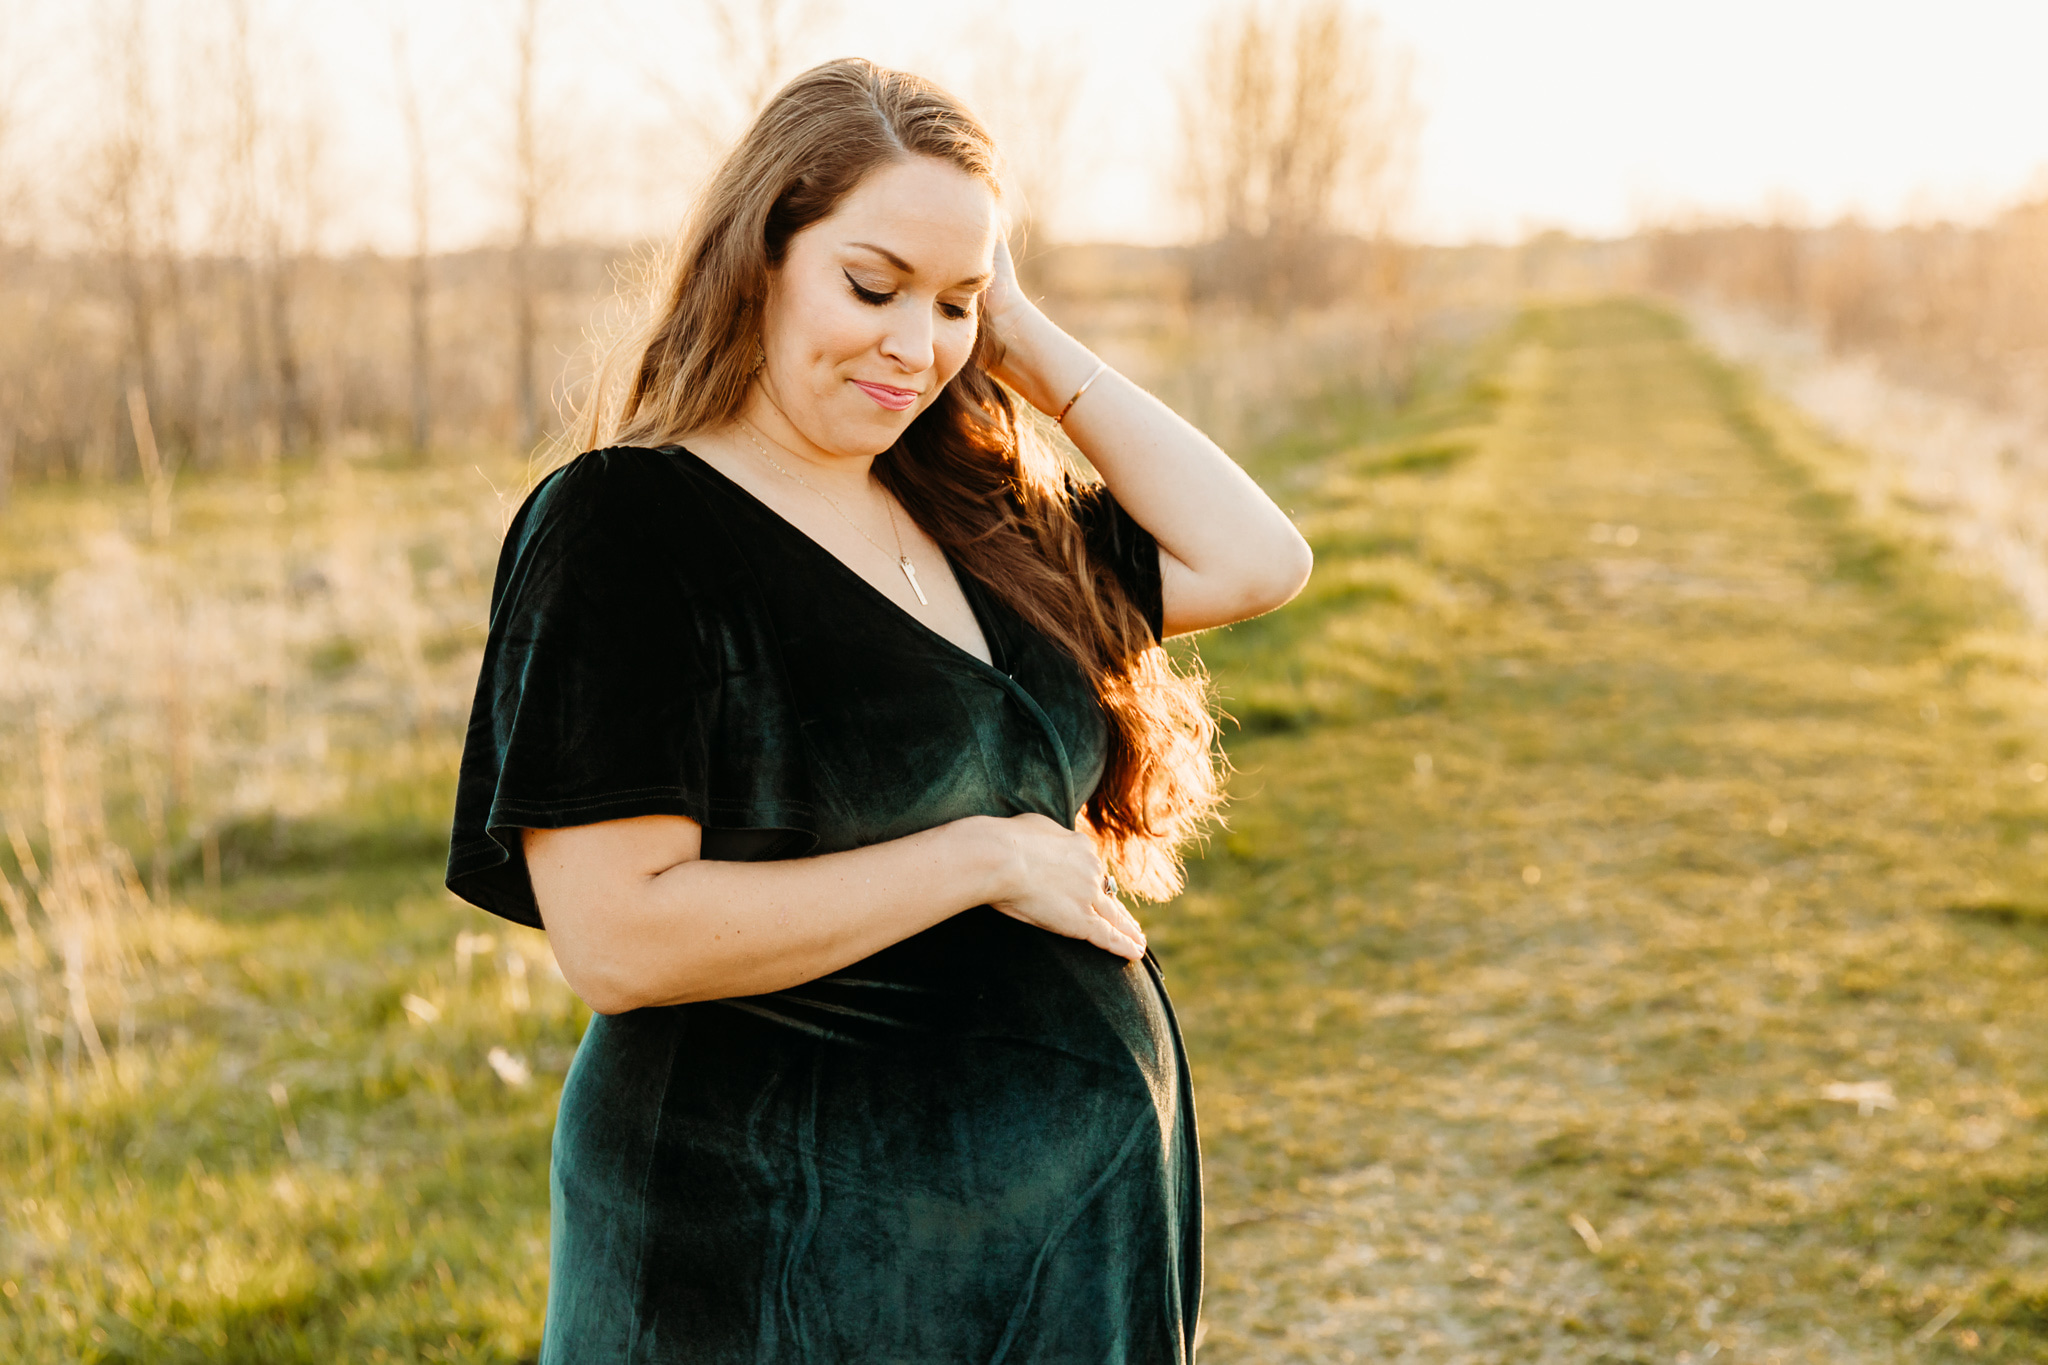 A mother to be looks down at her bump in a green velvet dress while standing in a grassy park path